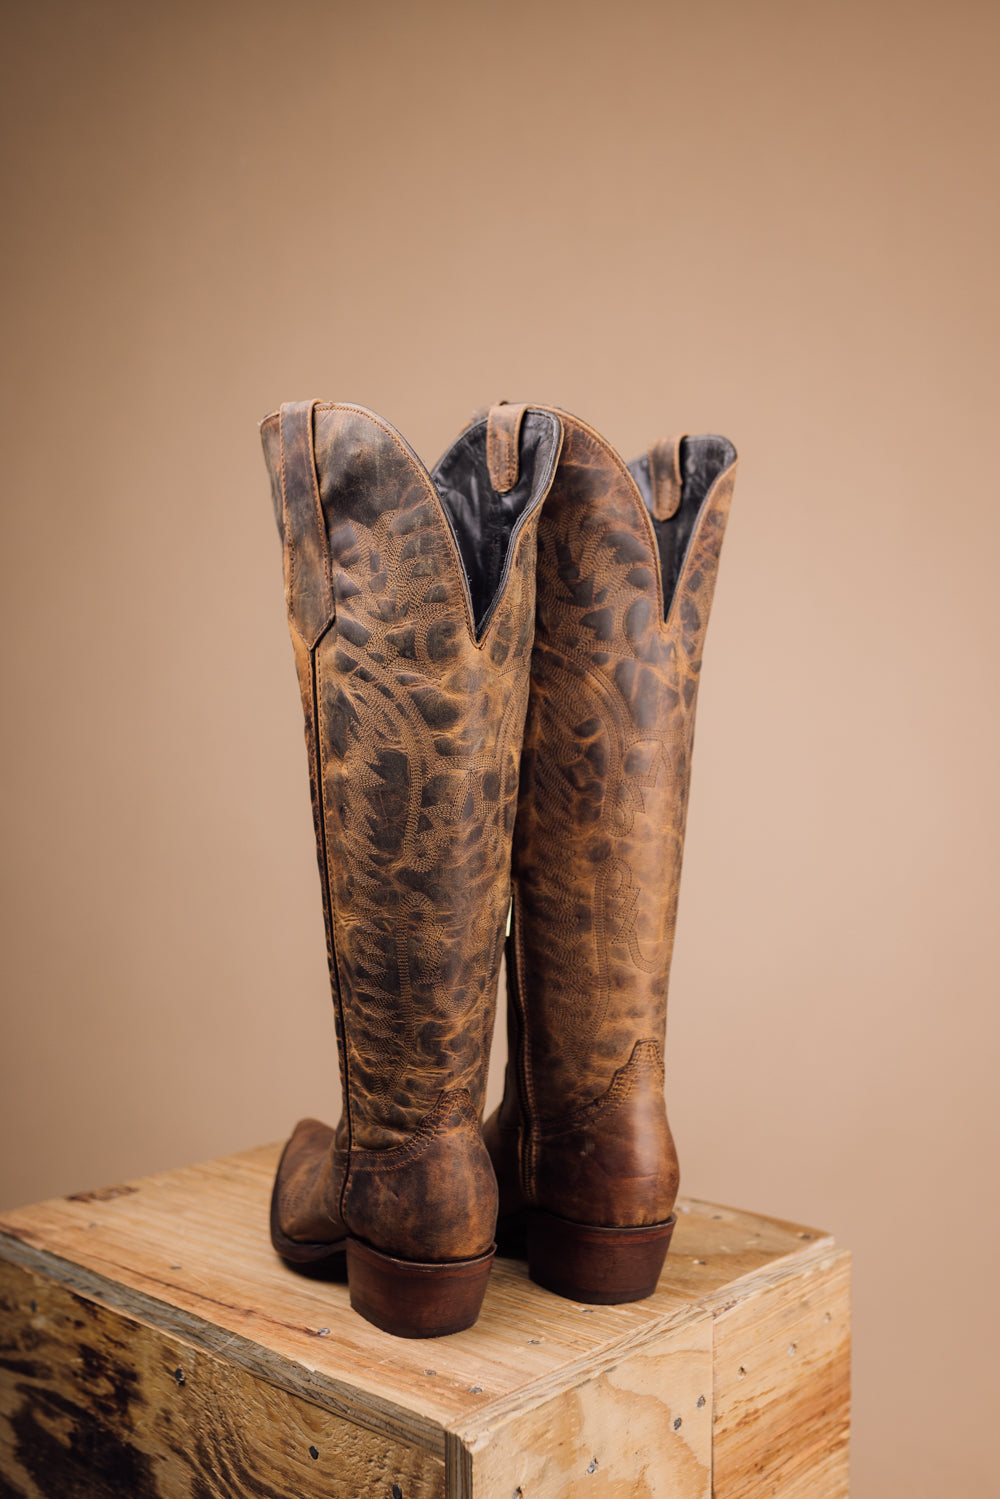 The Paola Tall Wide Calf Friendly Cowgirl Boot